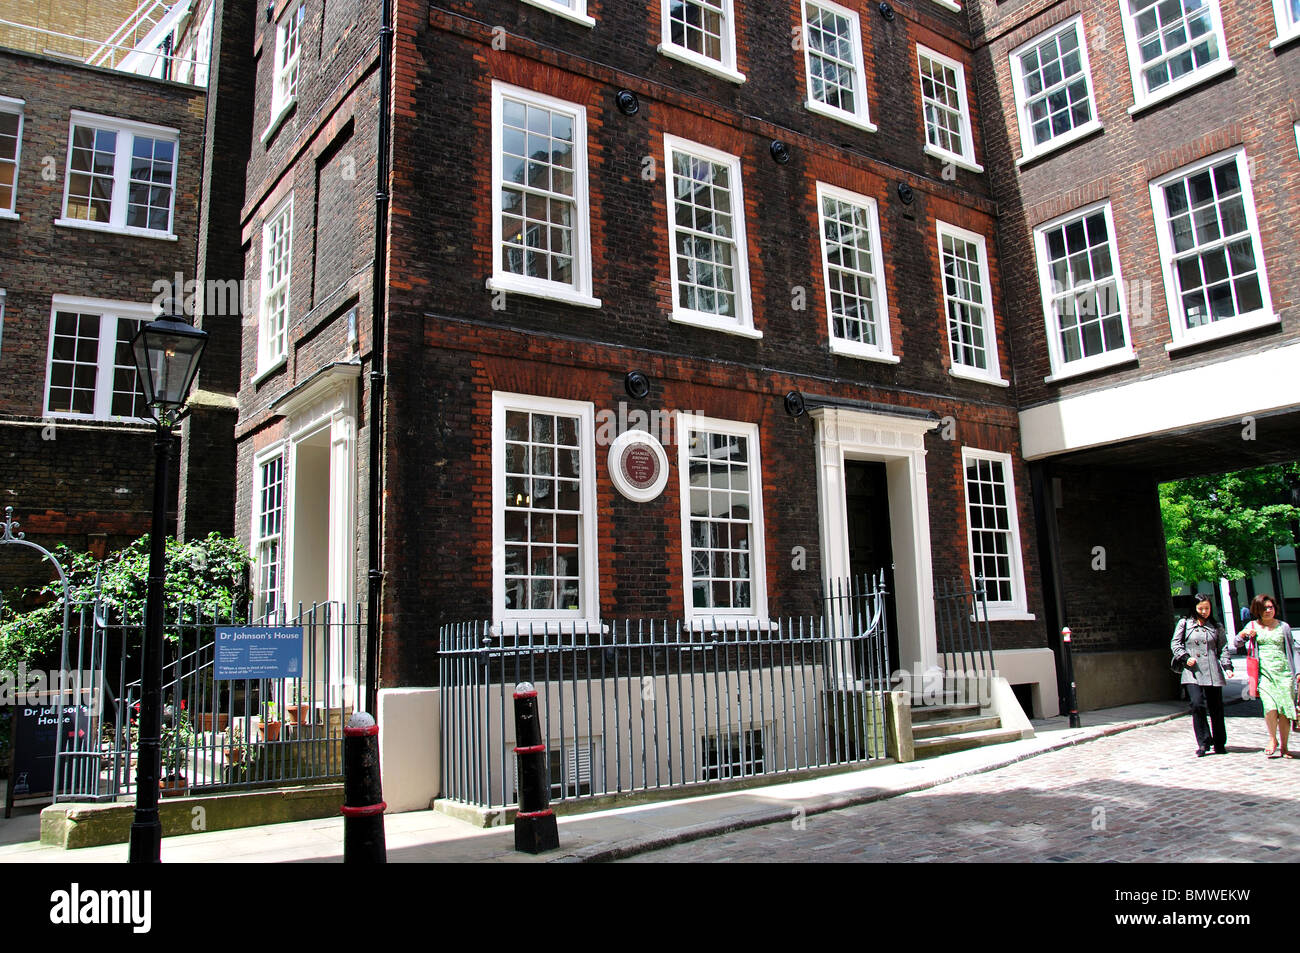 Dr Johnson's House, Gough Square, City of London, Greater London, Angleterre, Royaume-Uni Banque D'Images